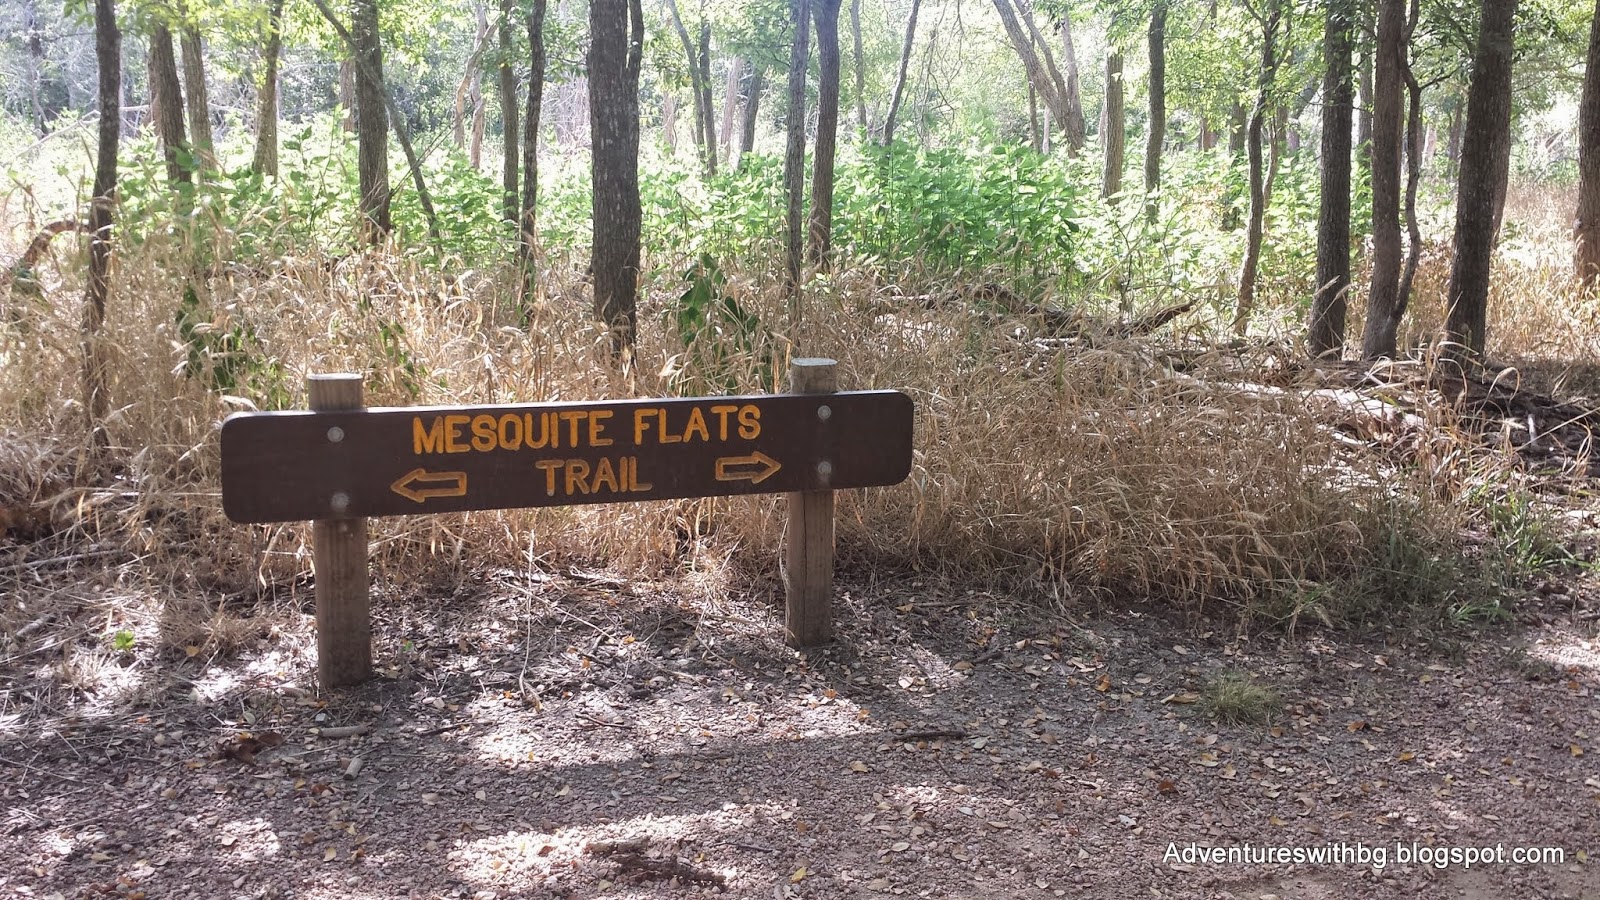 One of The Mesquite Flats Trailheads at palmetto state park